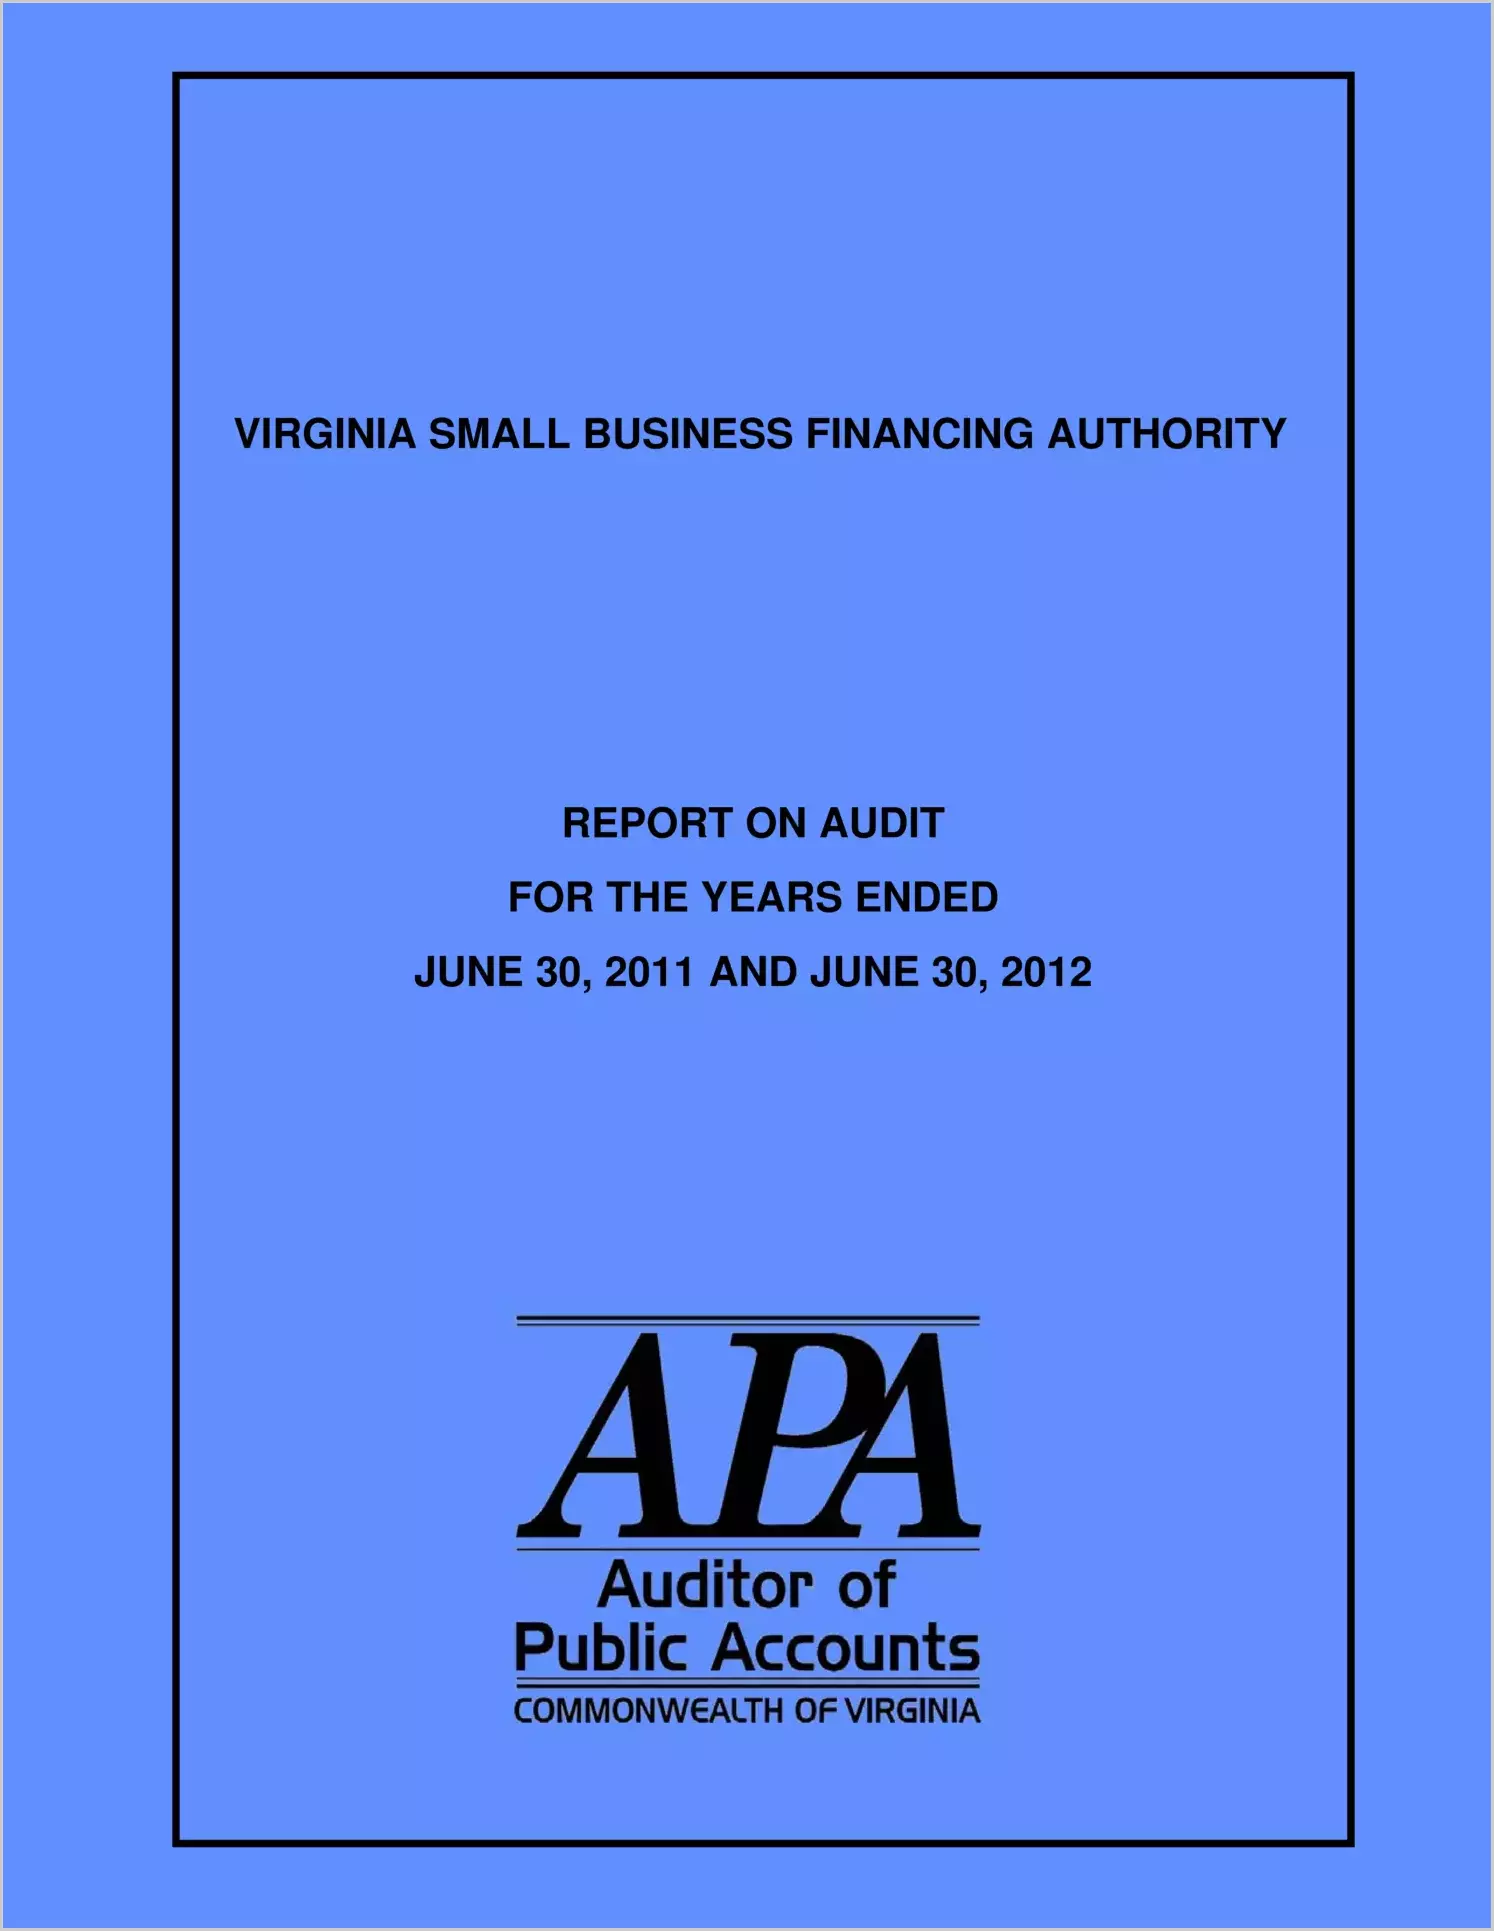 Virginia Small Business Financing Authority for the two years ended June 30, 2011 and June 30, 2012